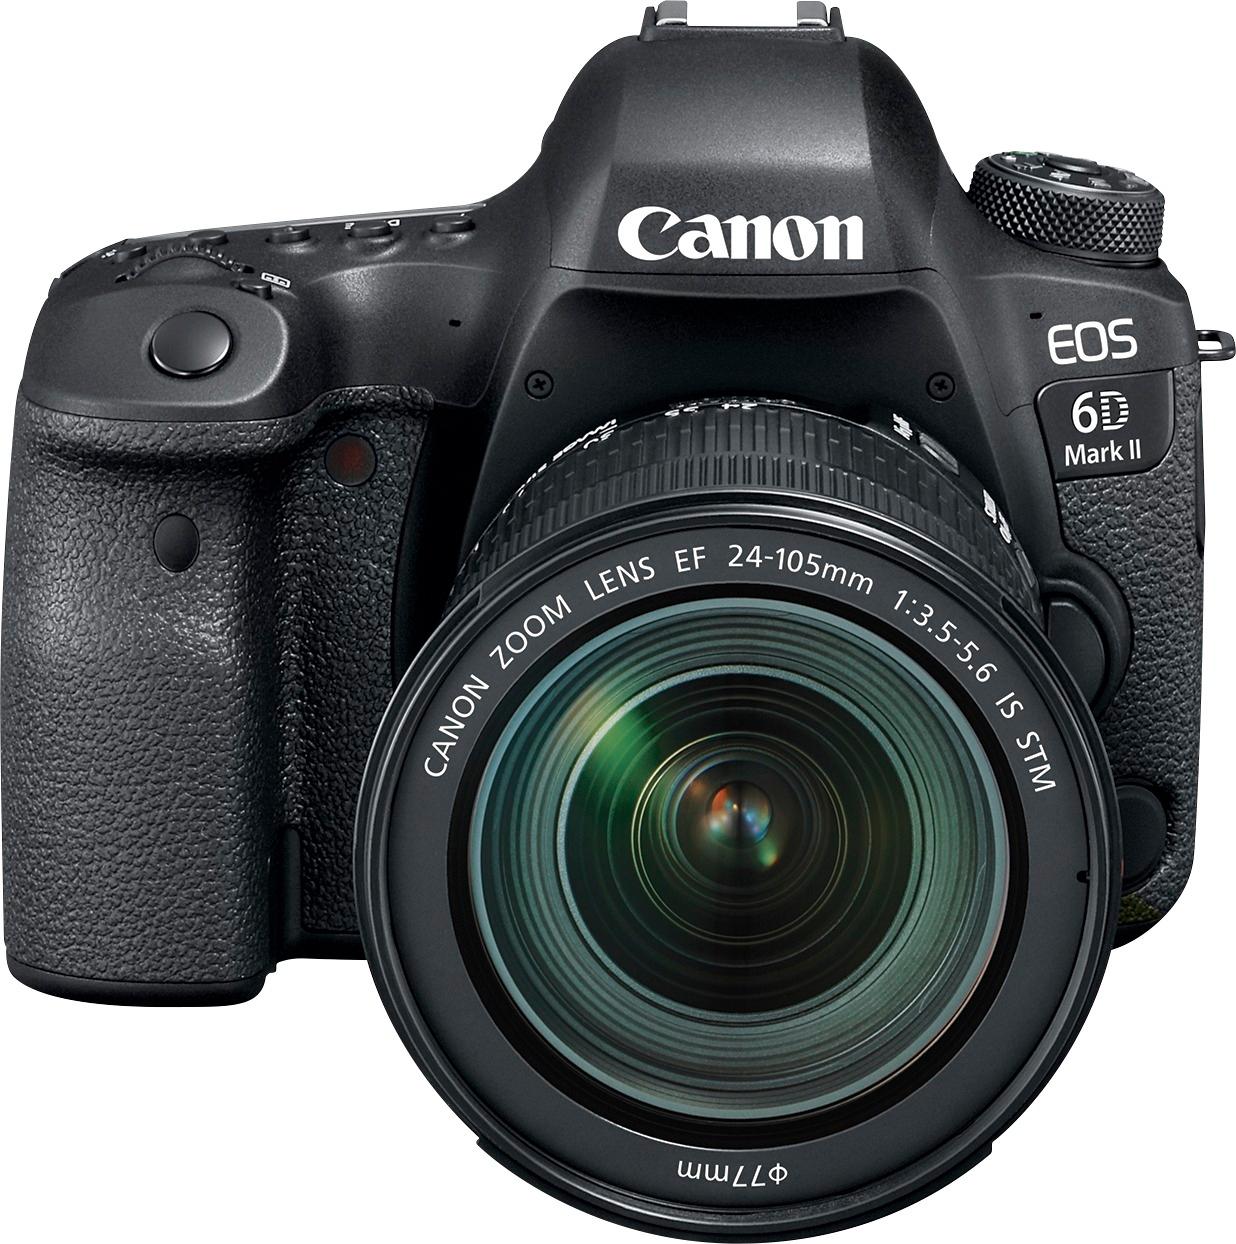 Best Buy: Canon EOS 6D Mark II DSLR Camera with EF 24-105mm f/3.5-5.6 IS STM Black 1897C021